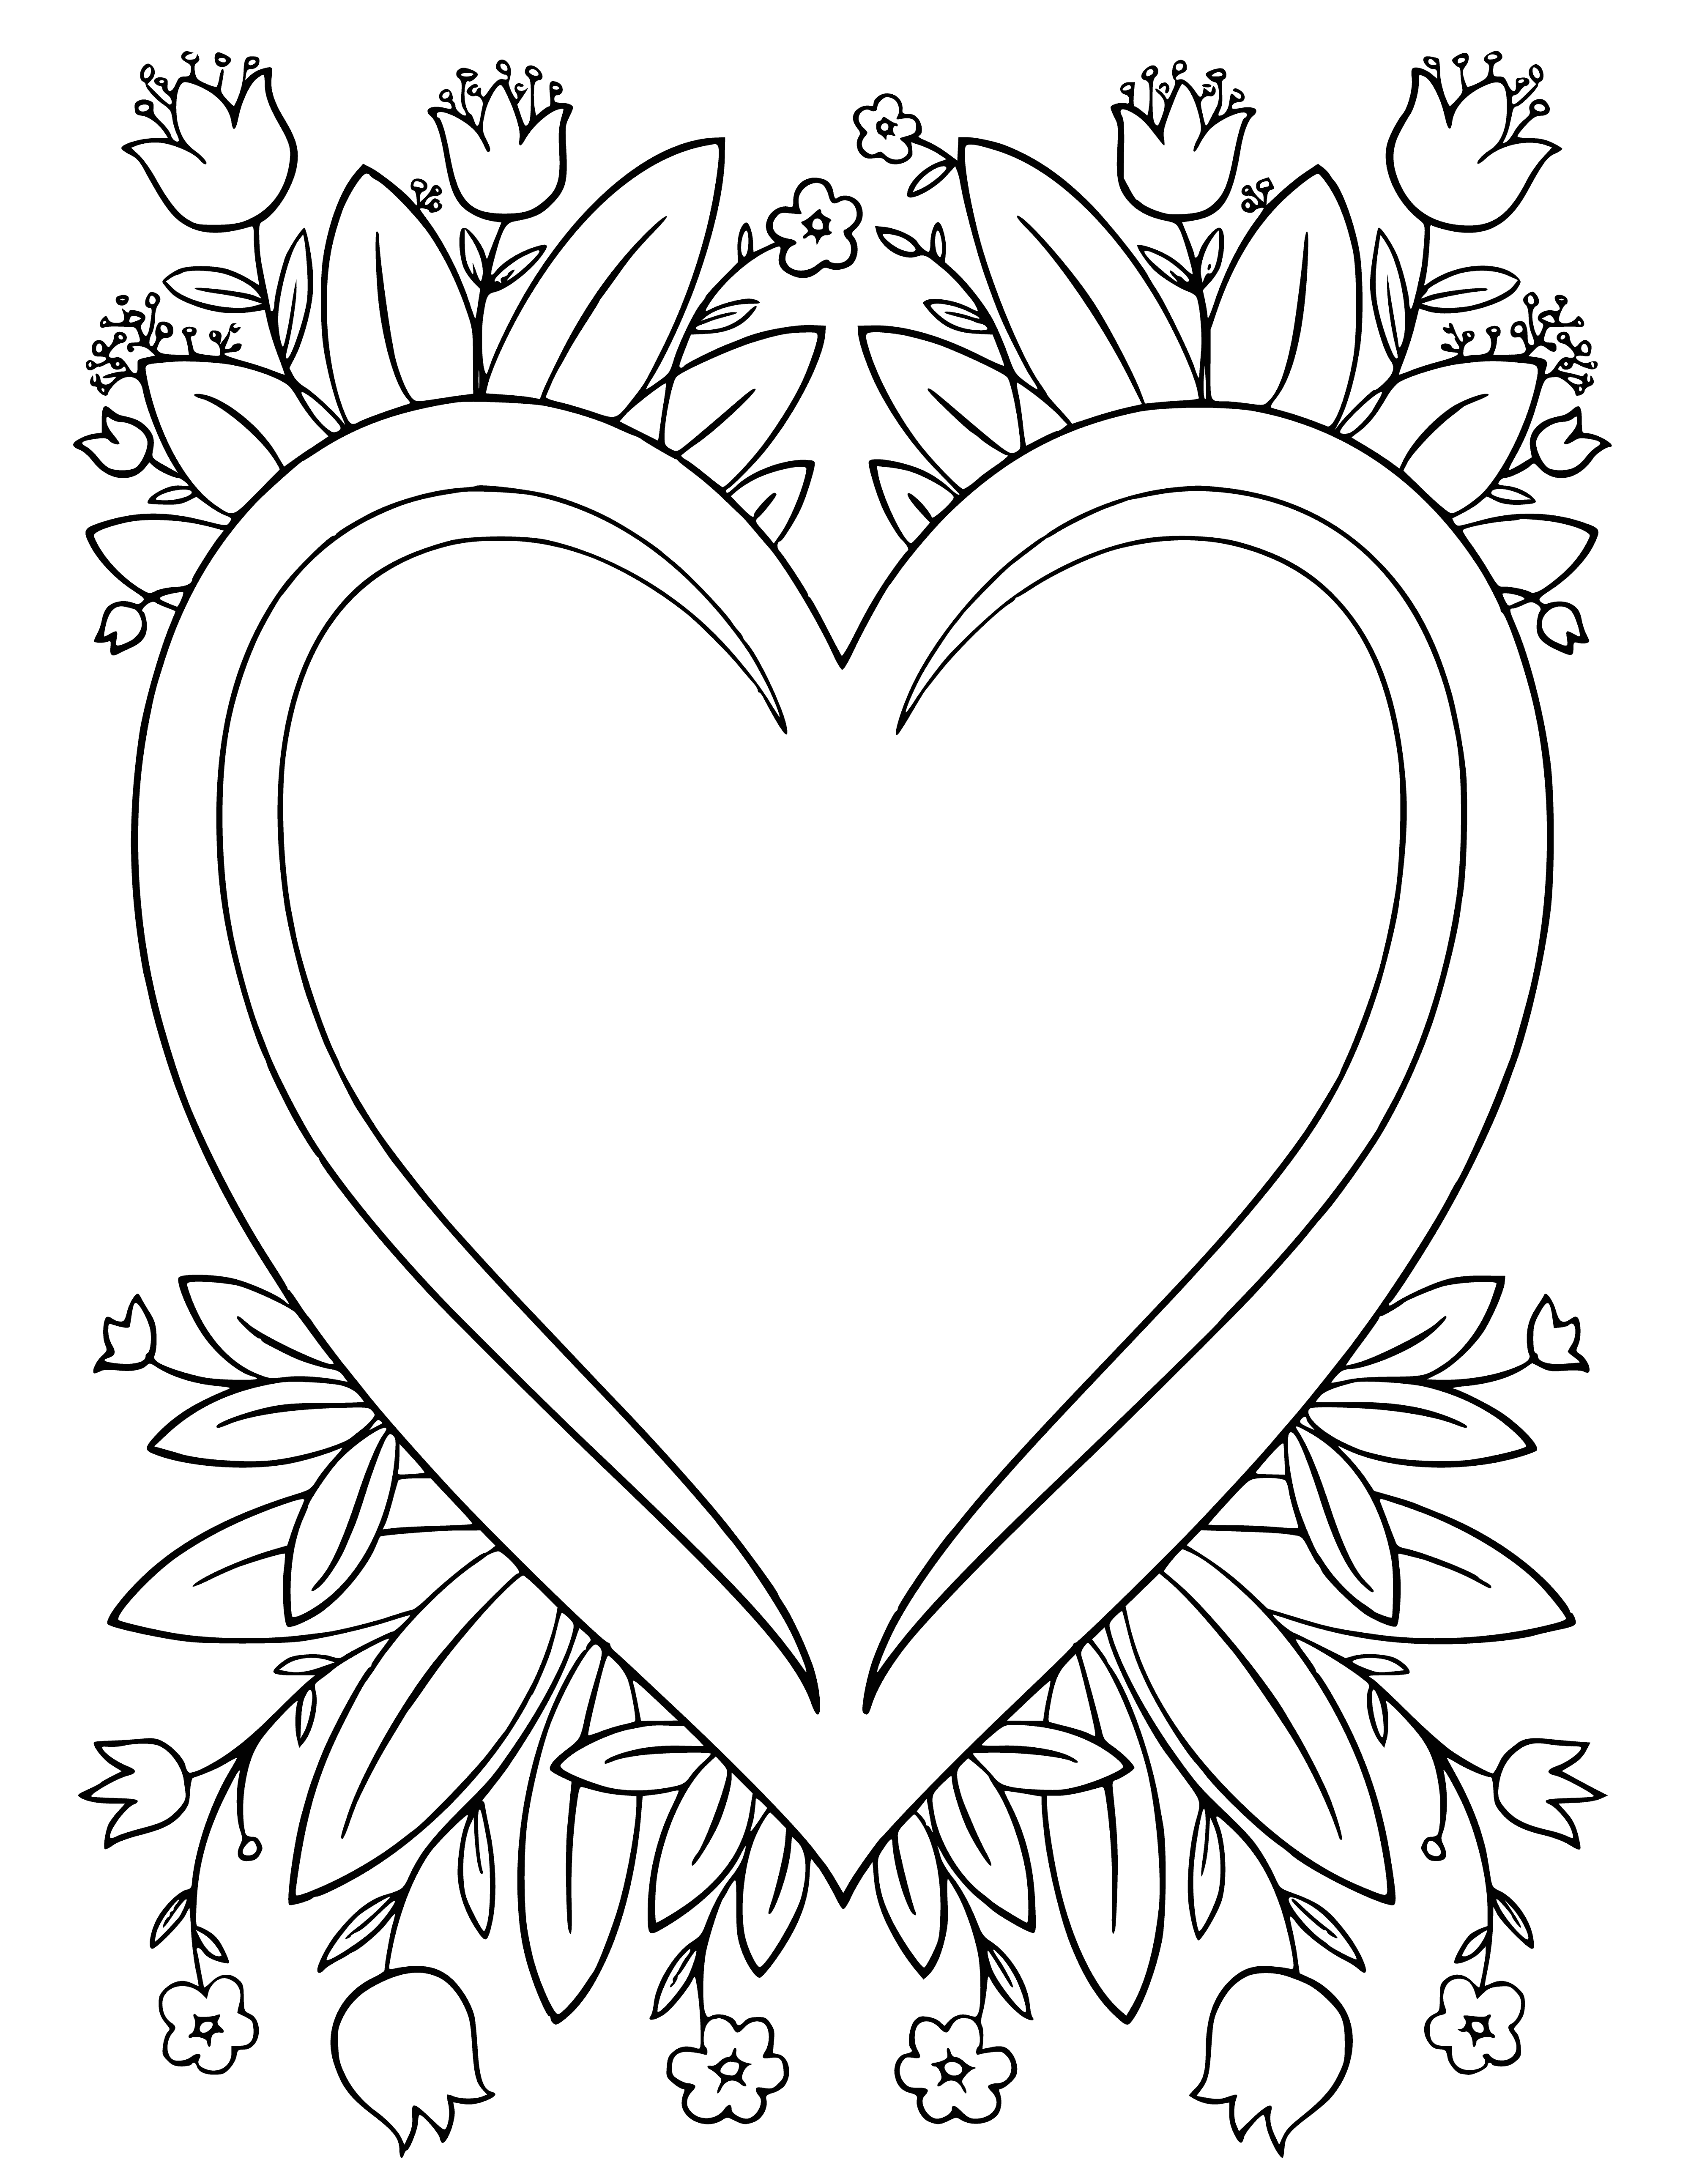 Heart and flowers coloring page